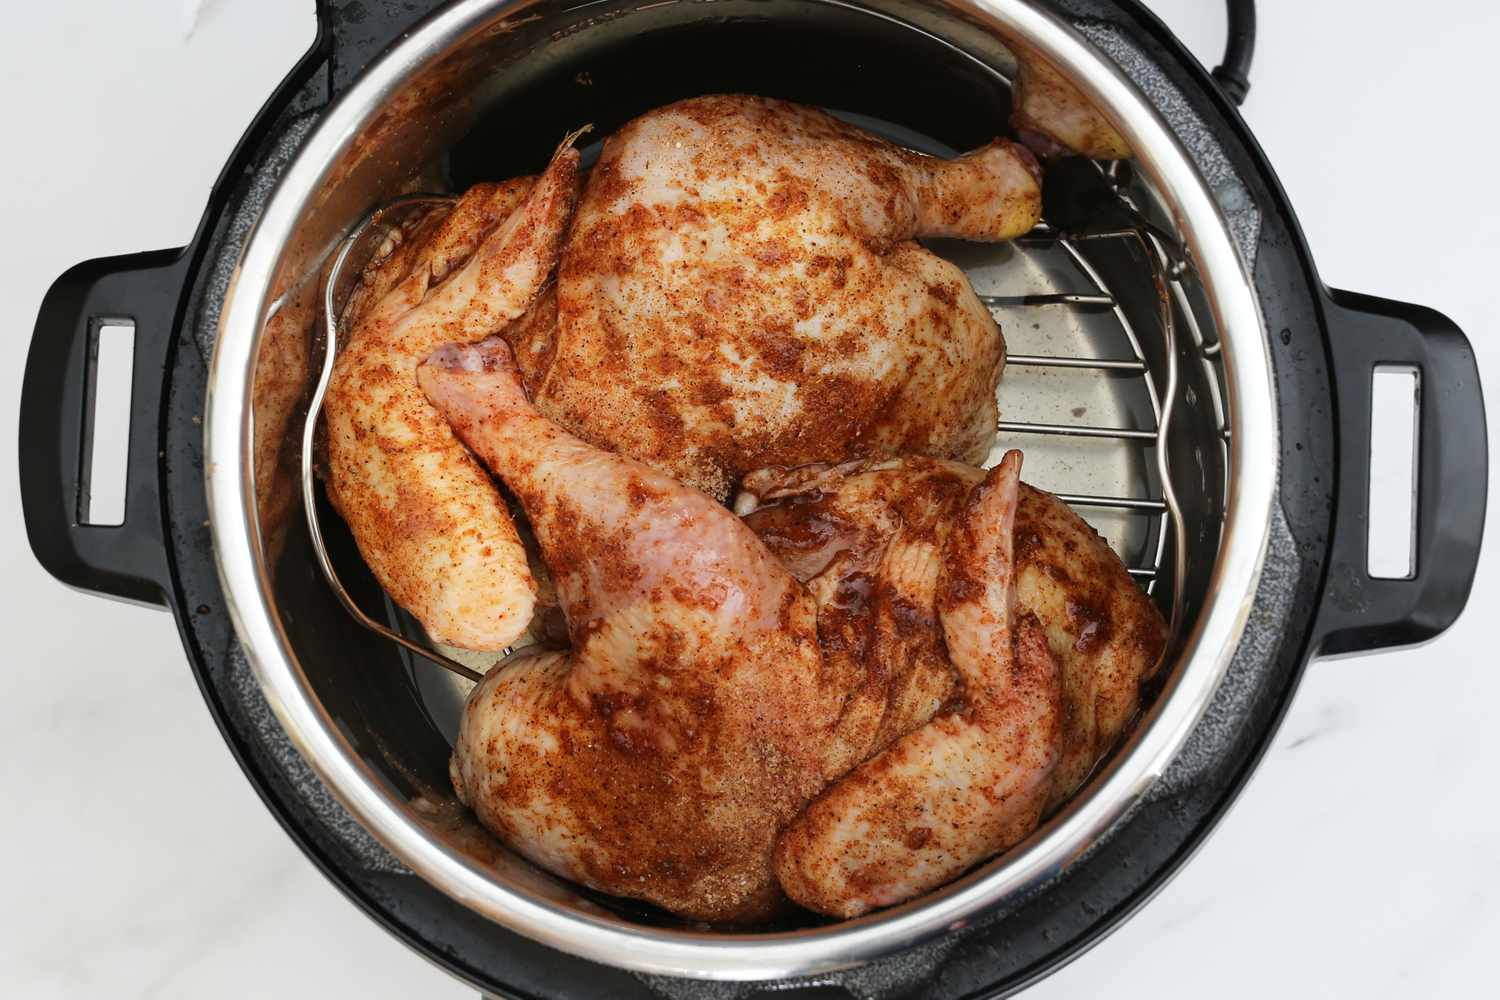 How Do I Fry Chicken In An Electric Pressure Cooker